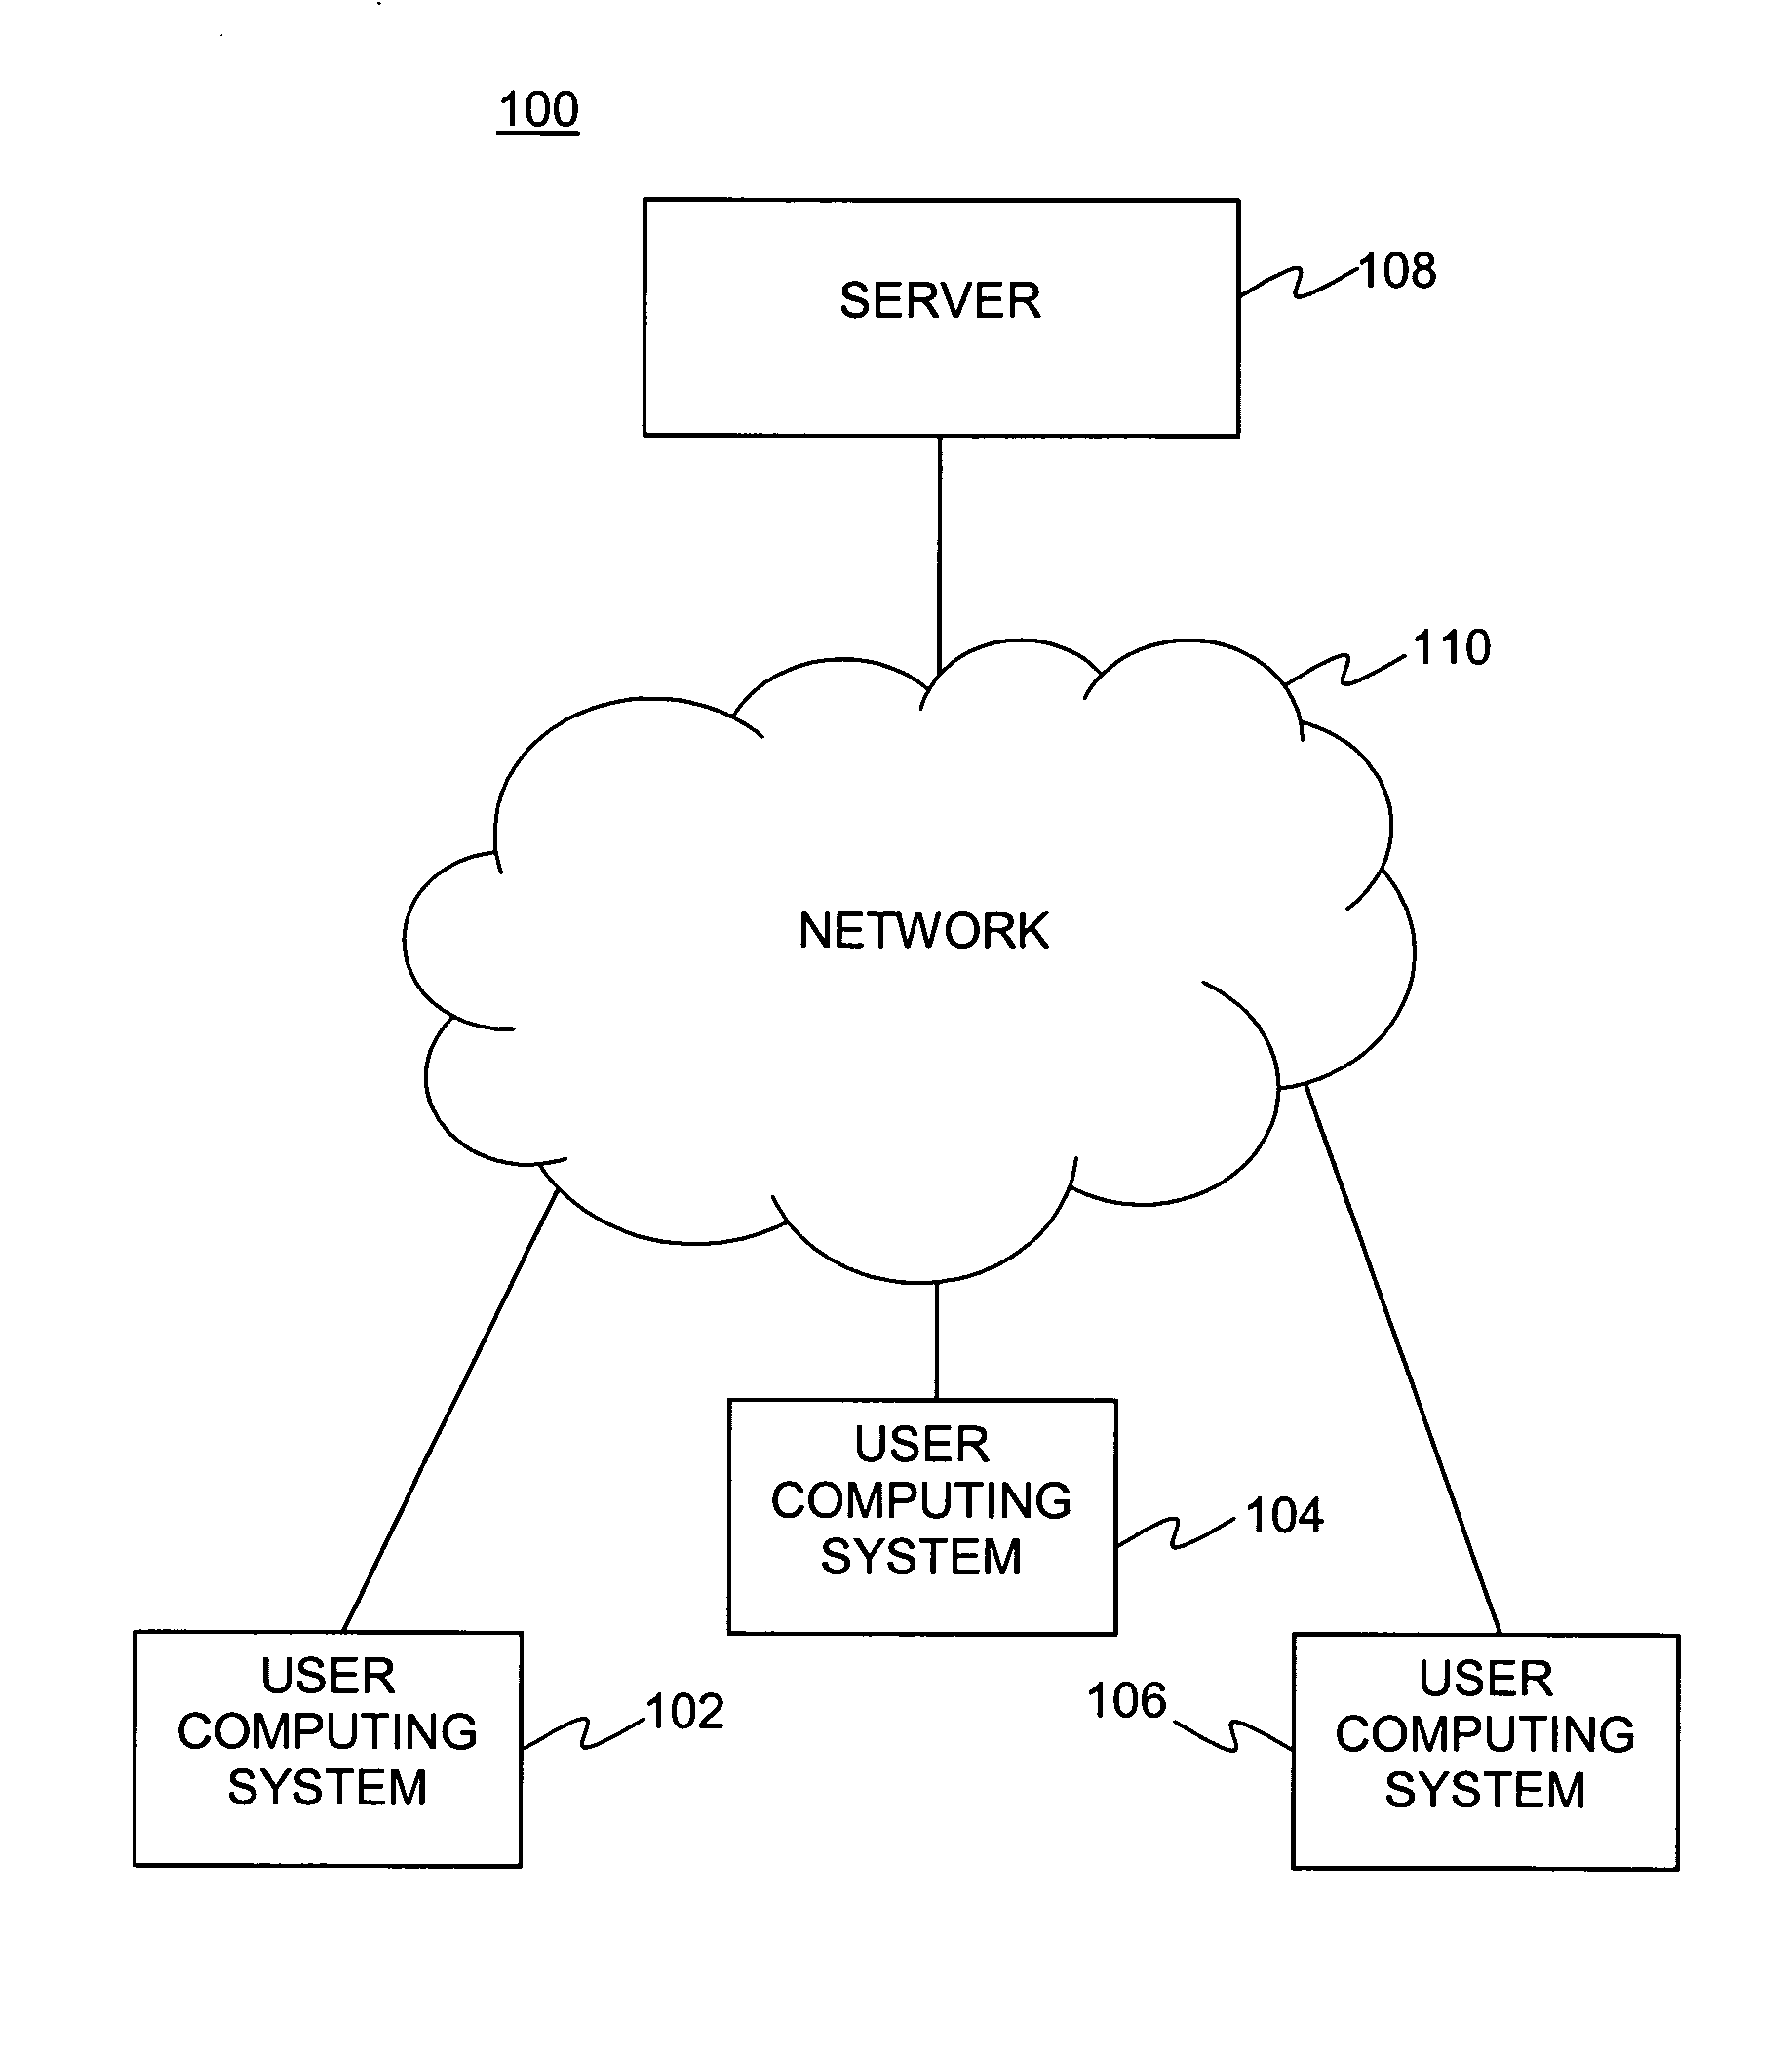 Method, system and program product for monitoring an online card game to provide a summary view and/or real-time notifications